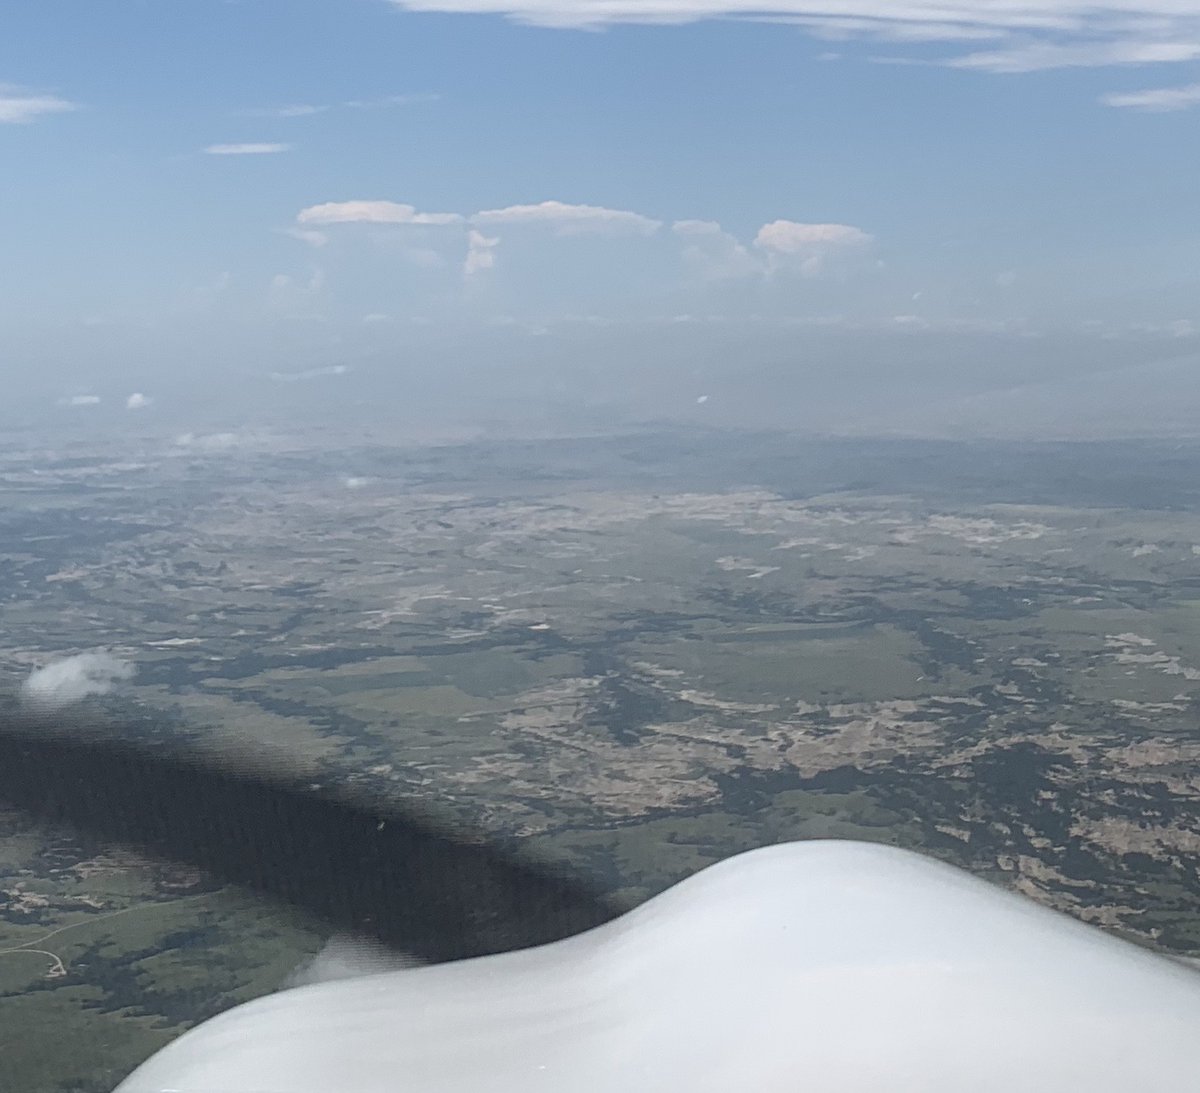 As I approached Rapid City, I could see where the Black Hills were from 50+ miles away, with towering cumulus clouds caused by was probably lifting action from the hills' higher elevation. The cells caused me no trouble on my approach, as the rain didn't even reach the ground.